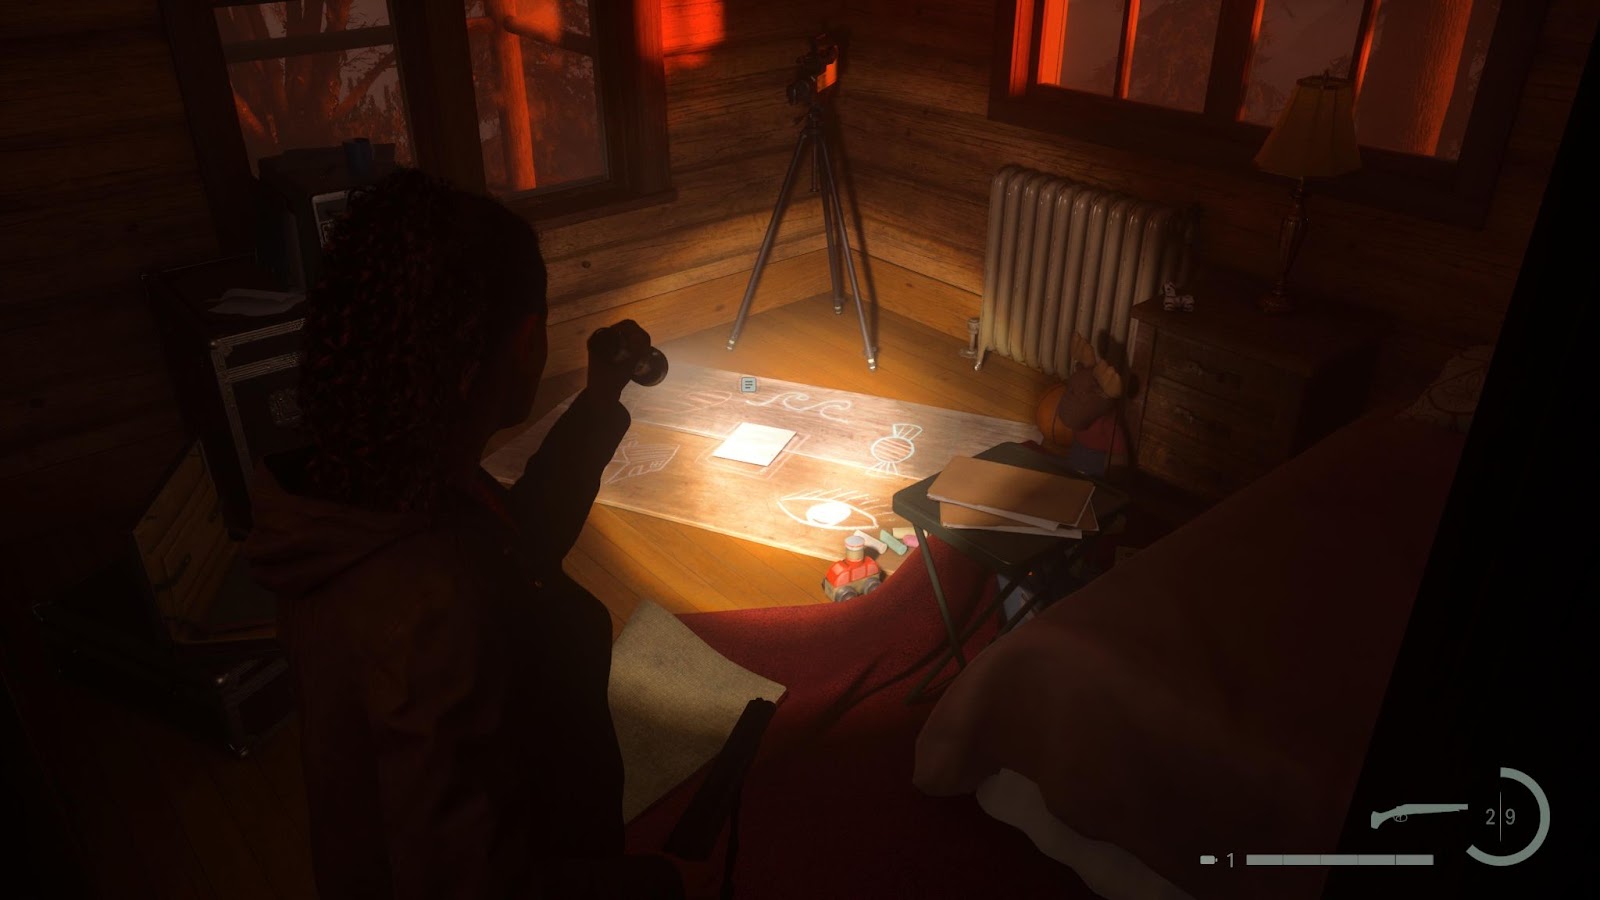 An in game screenshot of the ranger station nursery rhyme from Alan Wake 2. 